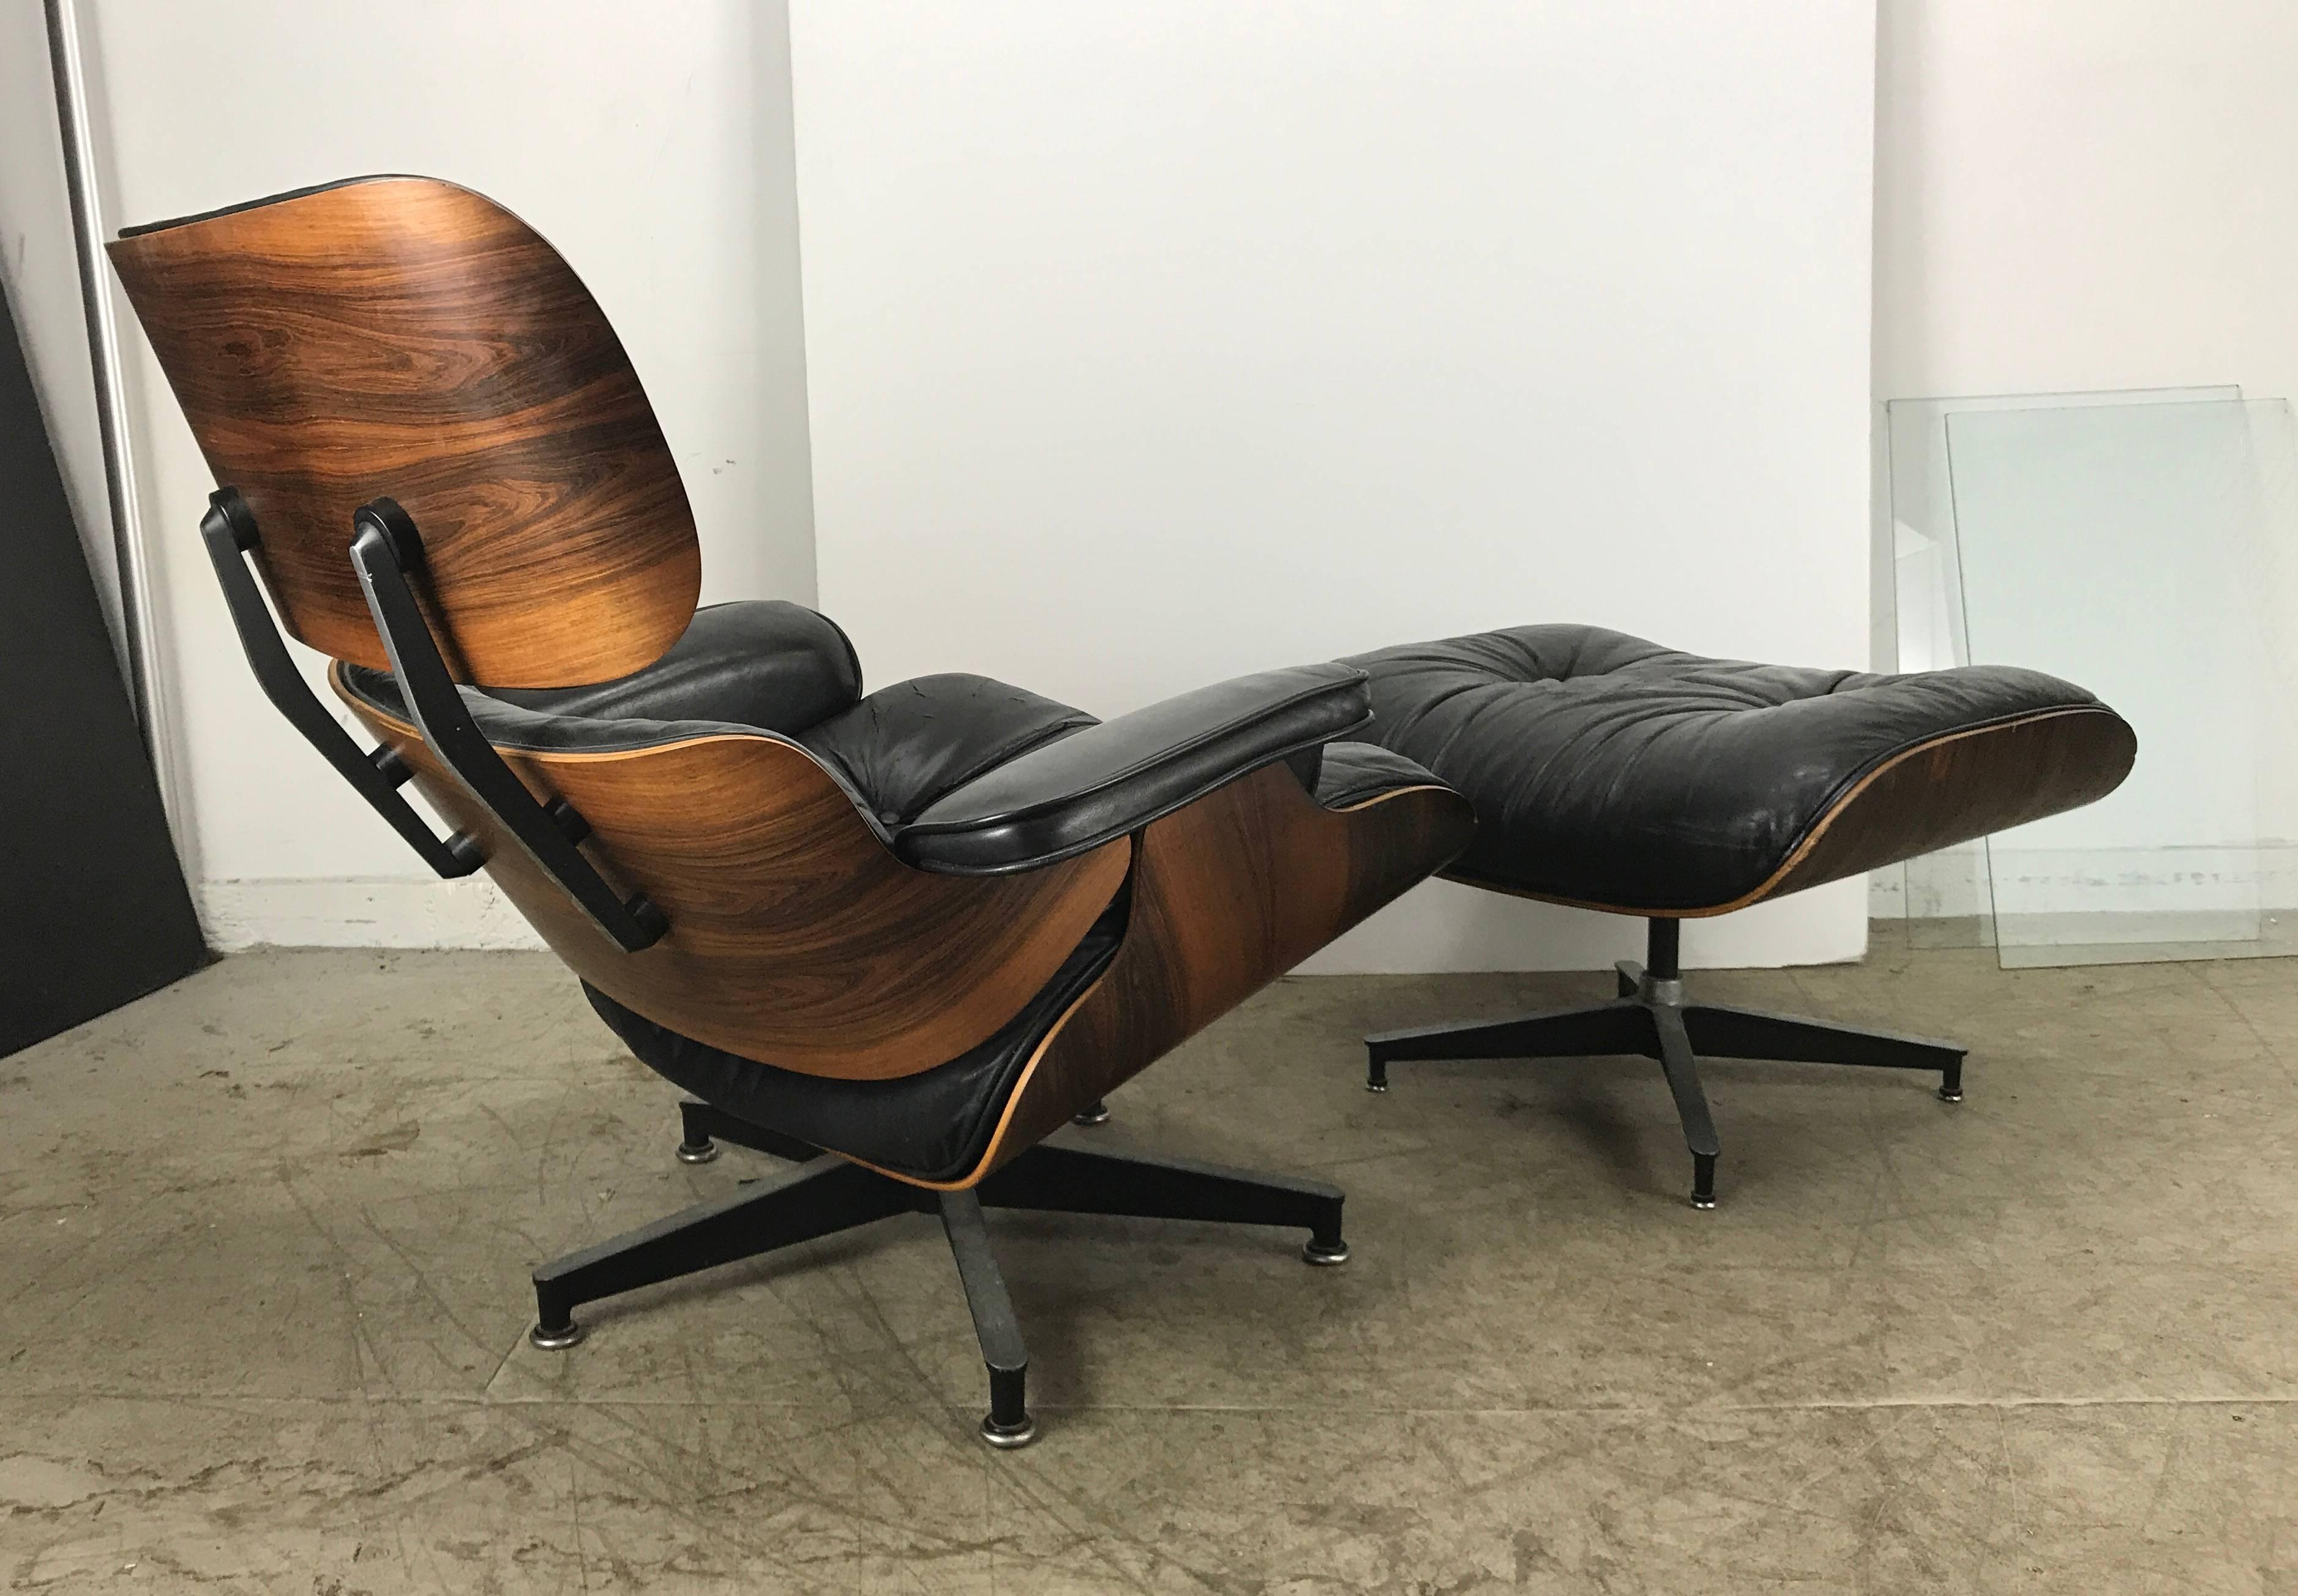 Classic rosewood and black leather lounge chair and ottoman, 670 & 671 designed by Charles and Ray Eames manufactured by Herman Miller, nice early version circa 1964, richly grained rosewood, nice original condition, minor wear to leather as well as